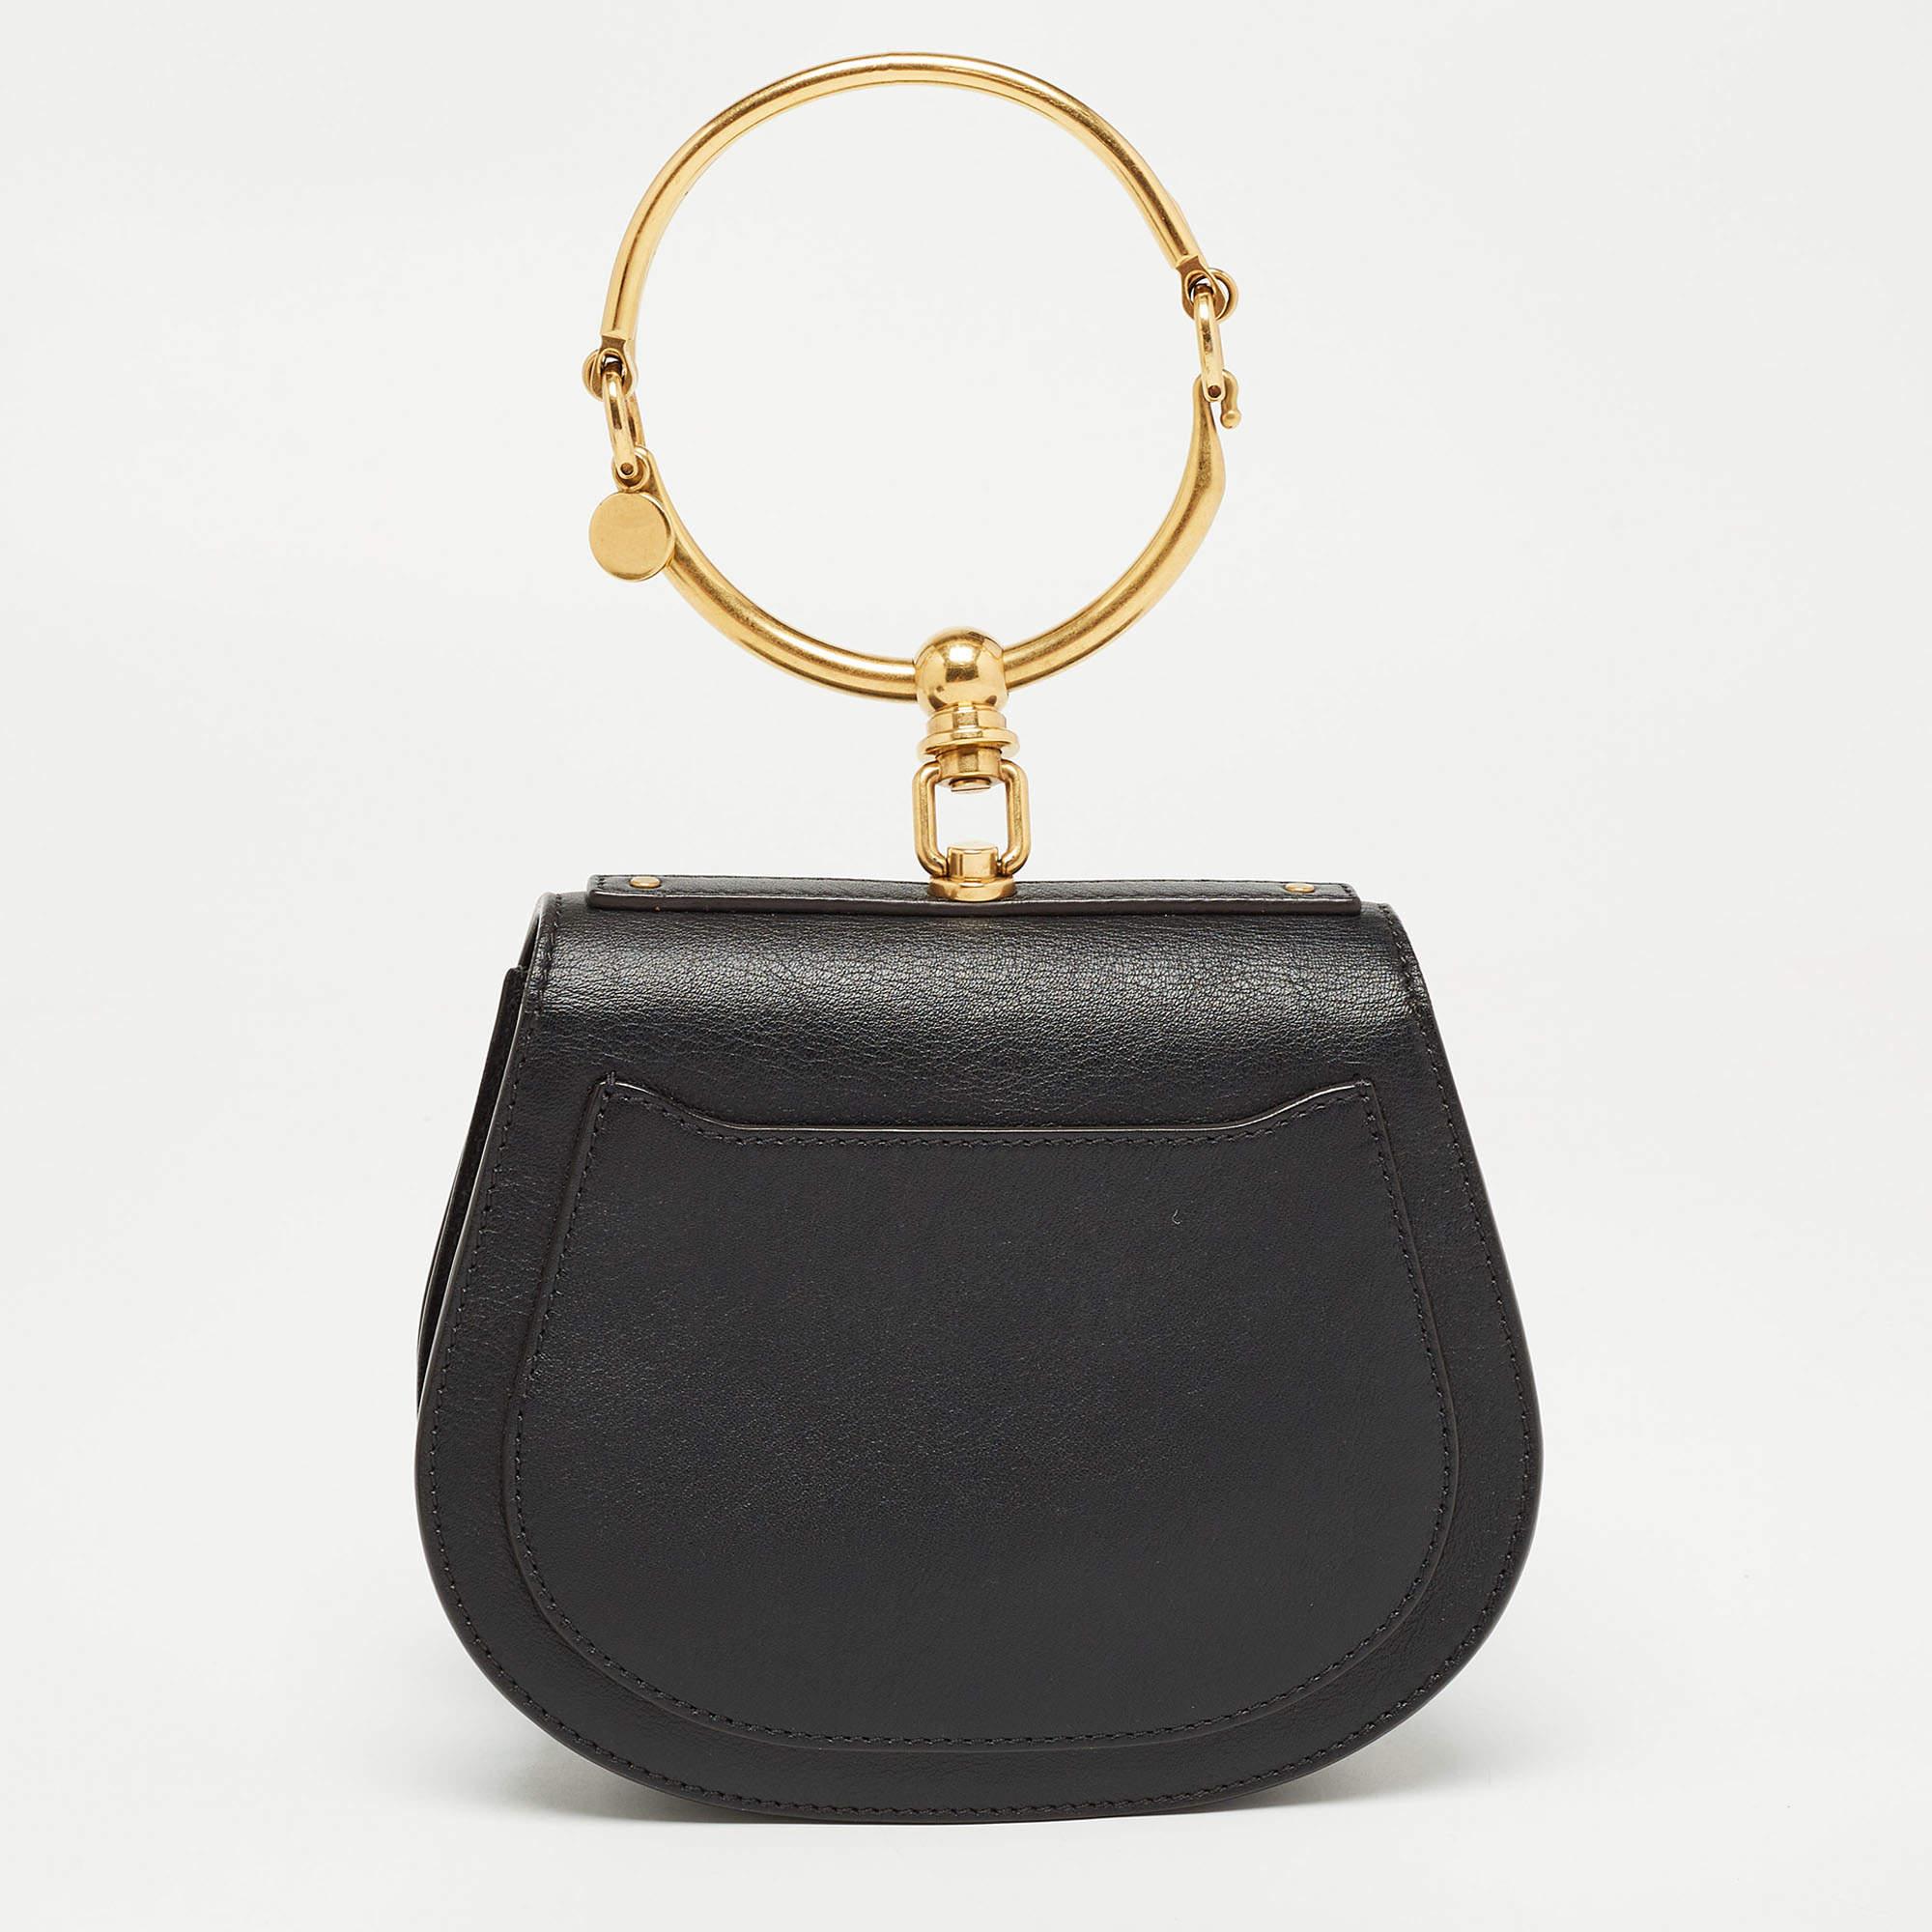 The Chloé Nile Bag is a luxurious and stylish accessory. Crafted from leather, it features intricate stud detailing and a unique bracelet handle. This compact crossbody bag exudes elegance and is perfect for carrying essentials while making a bold